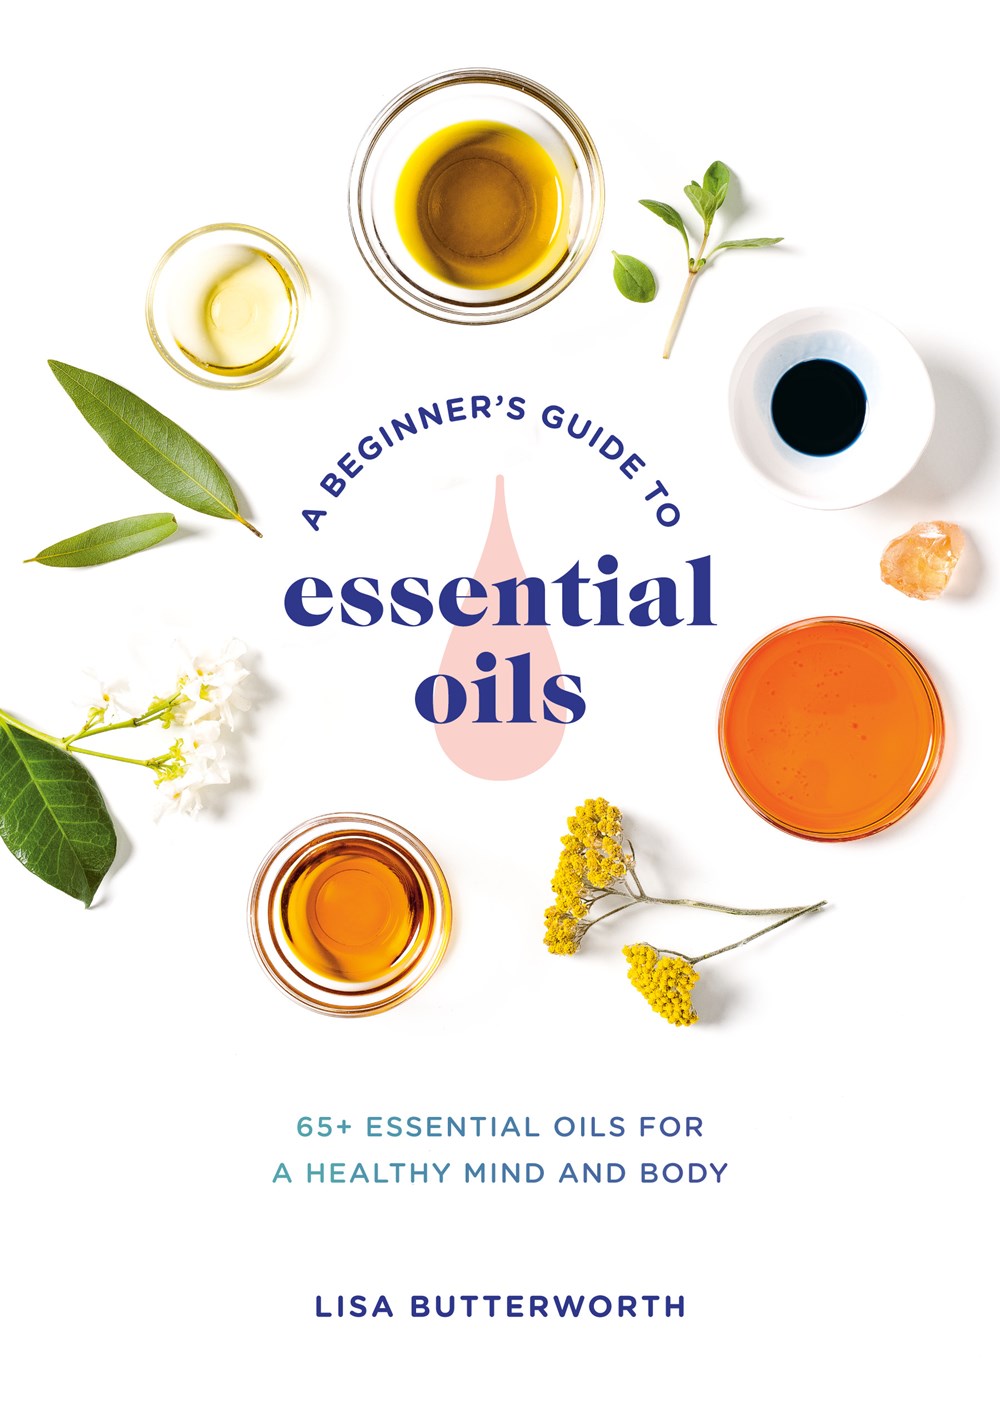 Beginner's Guide to Essential Oils